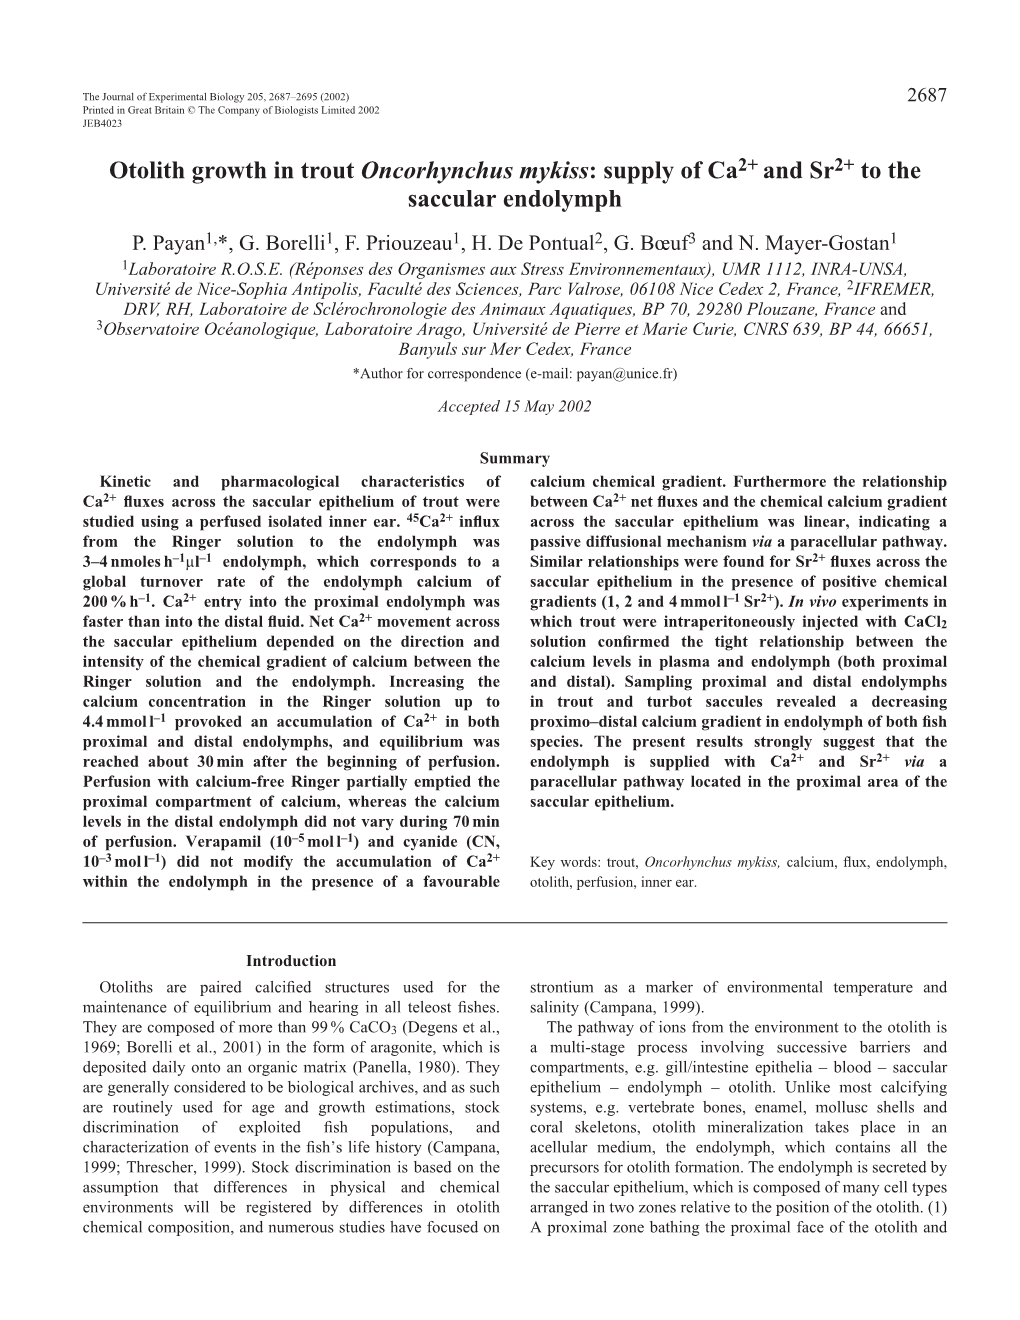 Endolymph Ca2+ and Sr2+ Homeostasis and Otolith Growth 2689